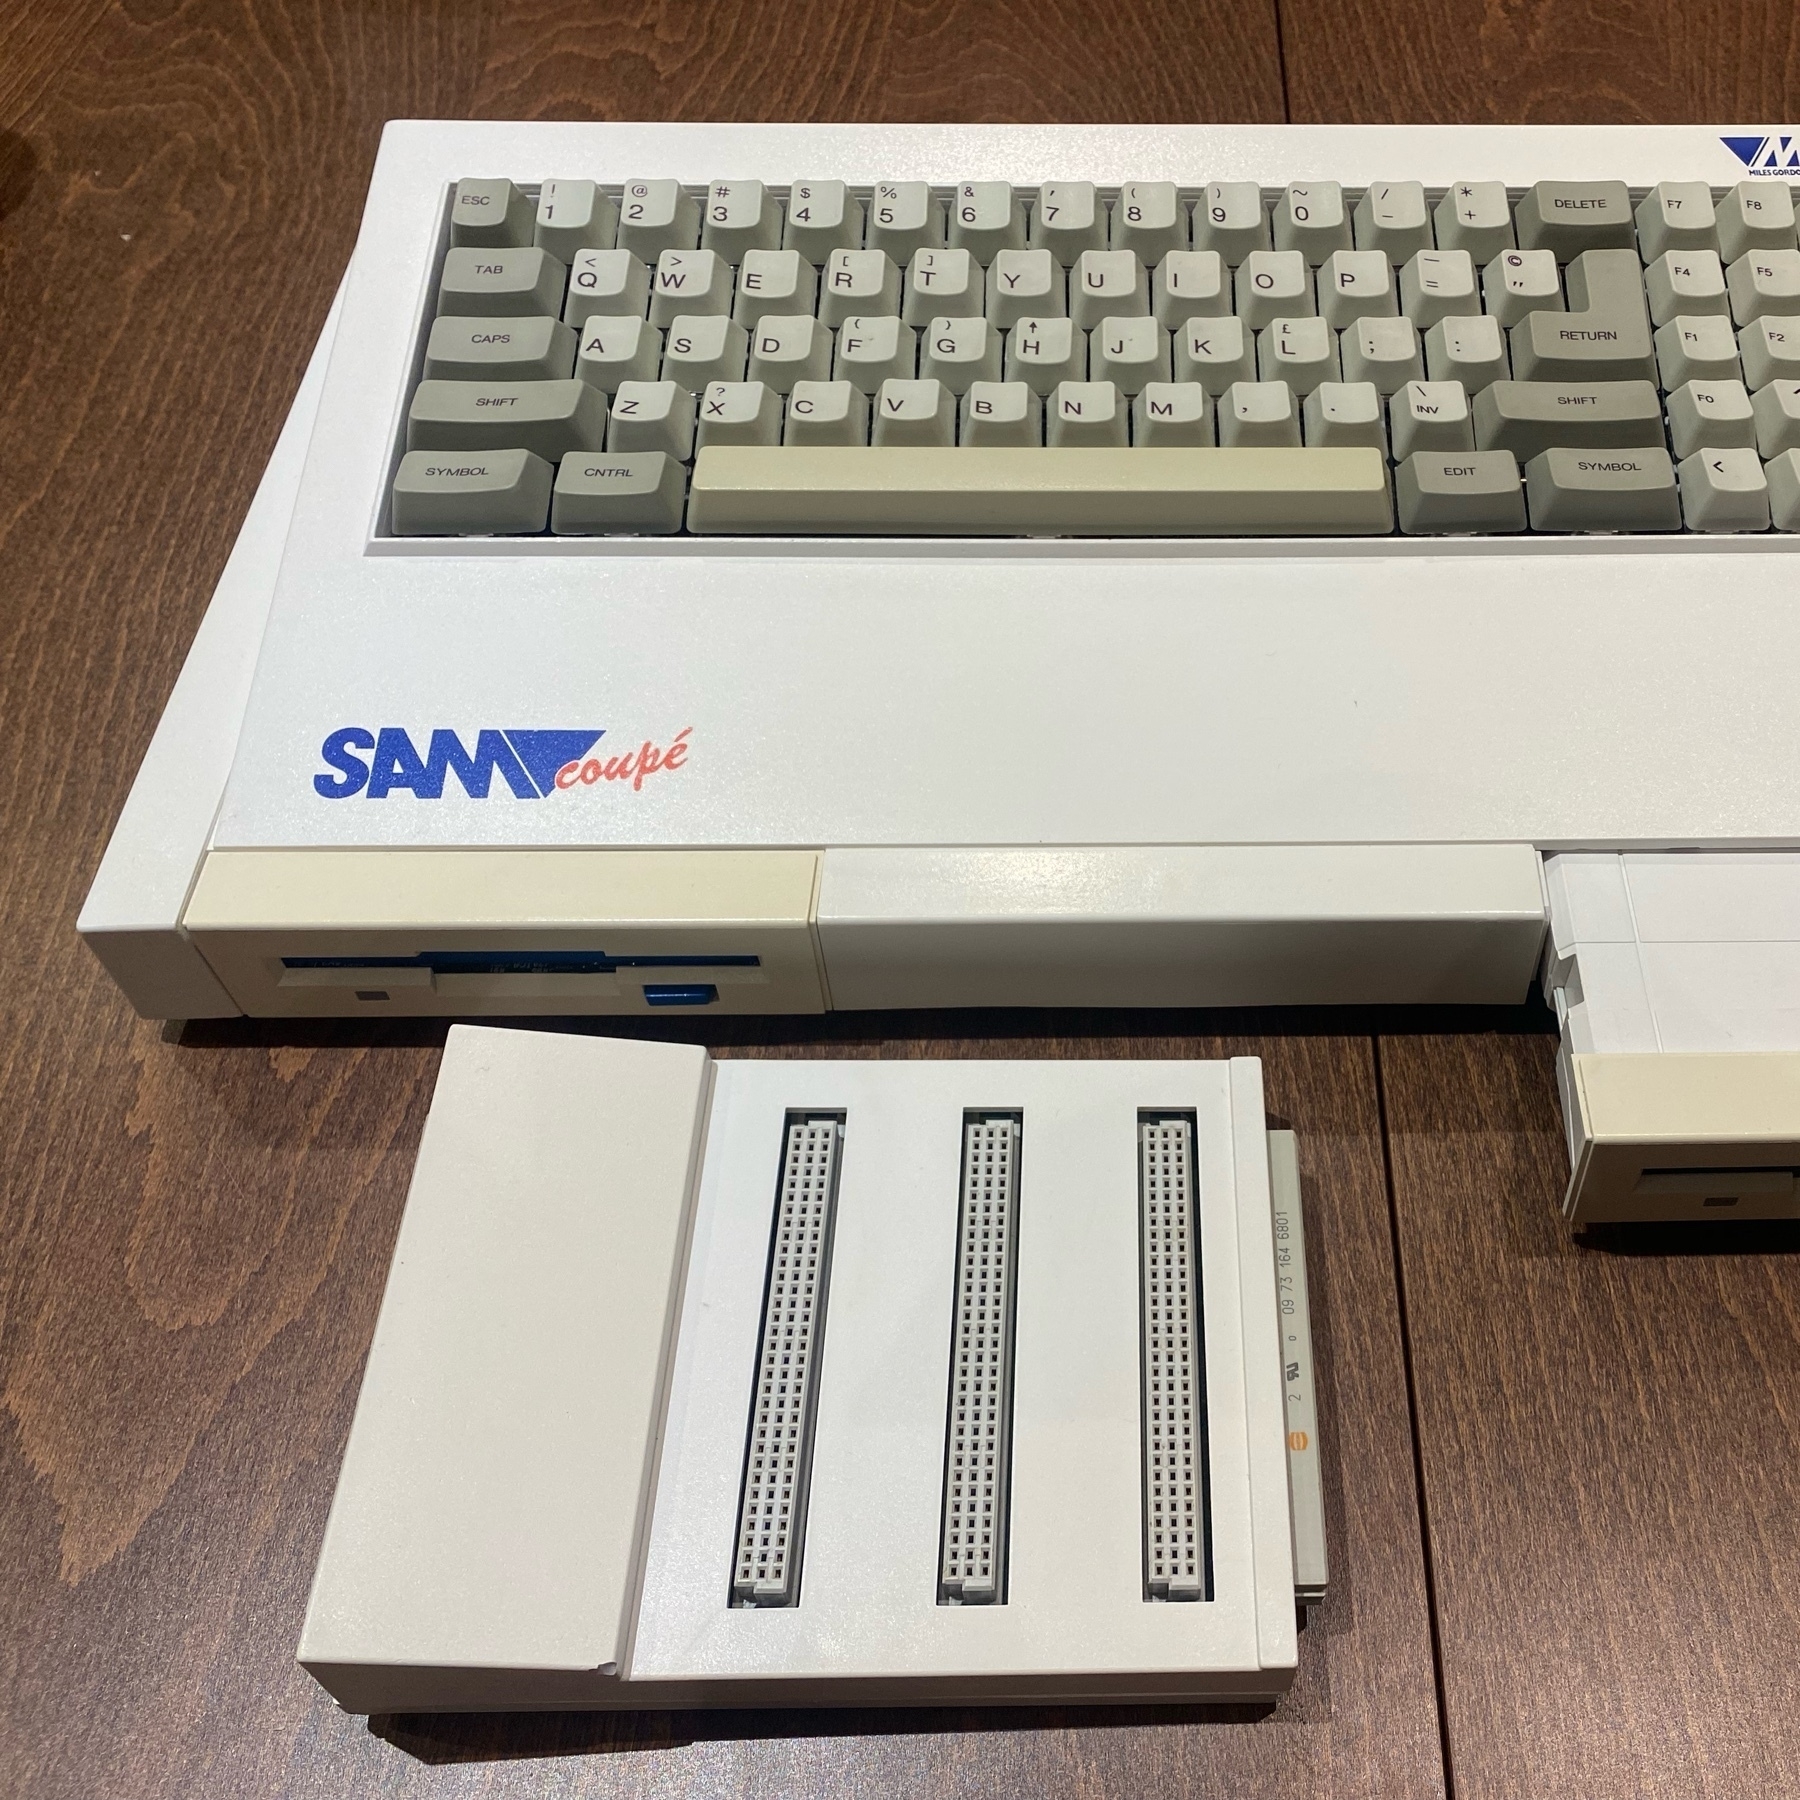 SAM Coupé computer with a SamCo card cage accessory. the floppy drive face plave on the SAM is noticeably more yellowed than the rest of the ostensibly white plastic